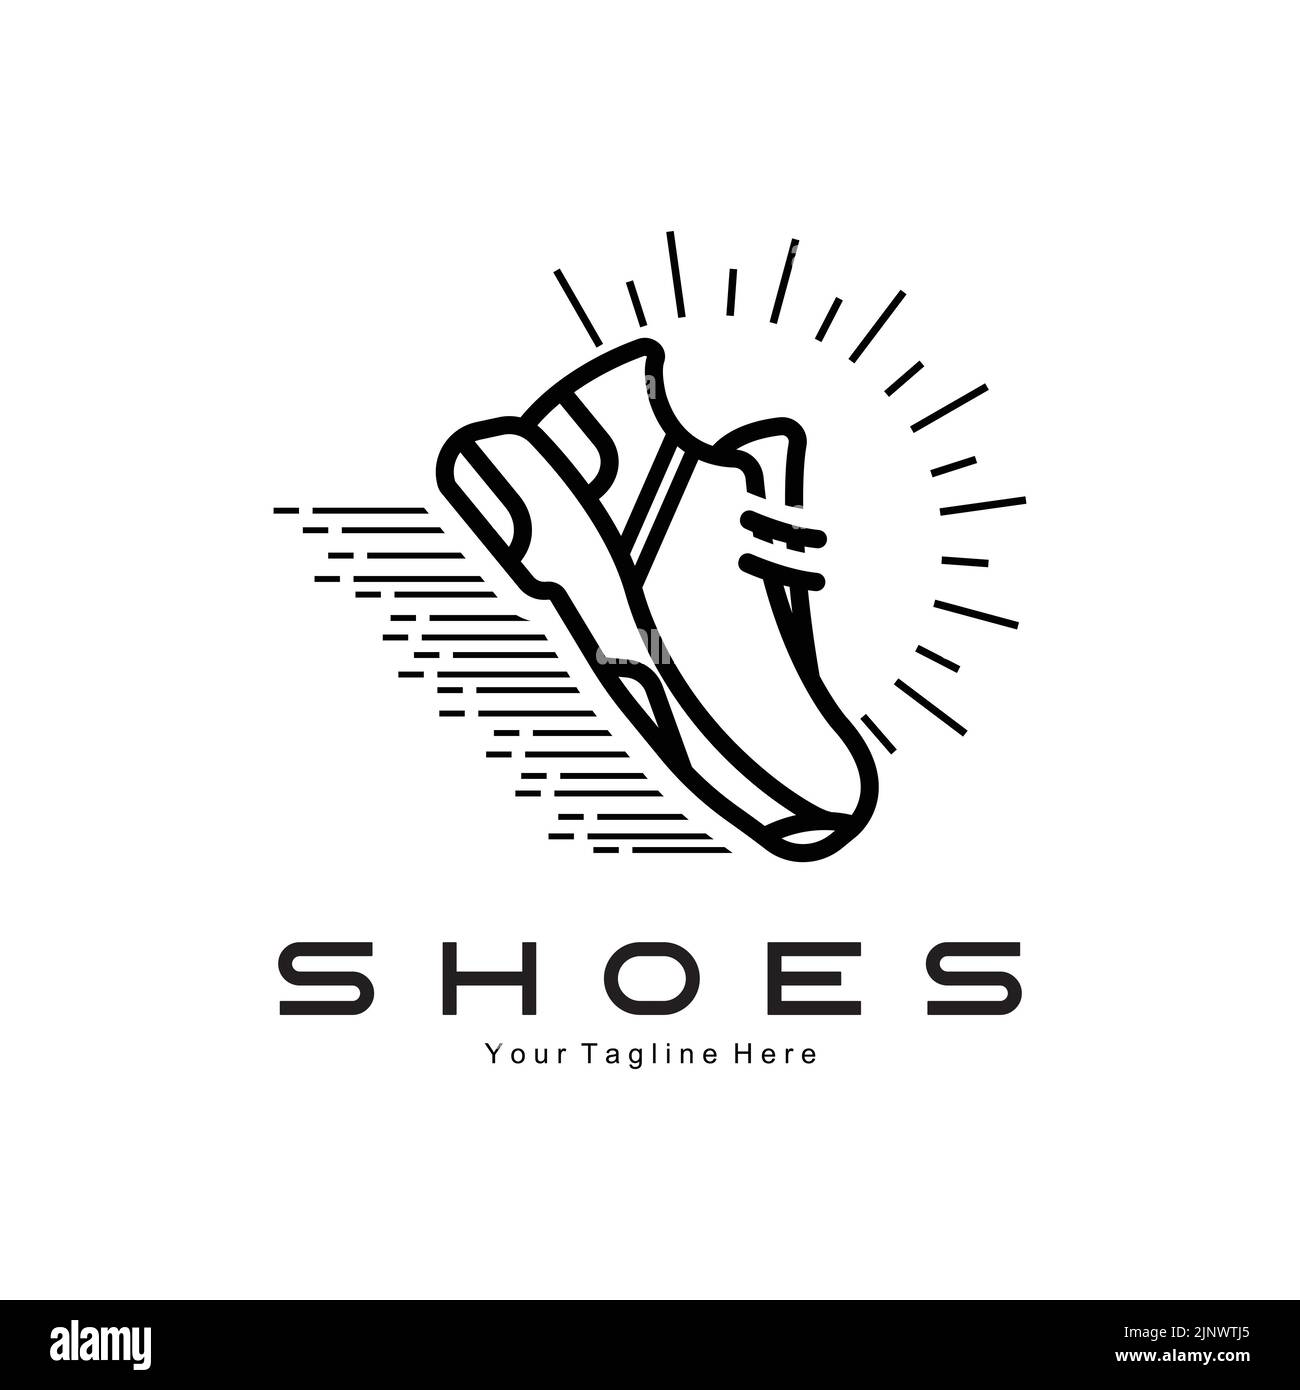 Sneakers Shoe Logo Design, vector illustration of trending youth footwear, simple funky concept Stock Vector